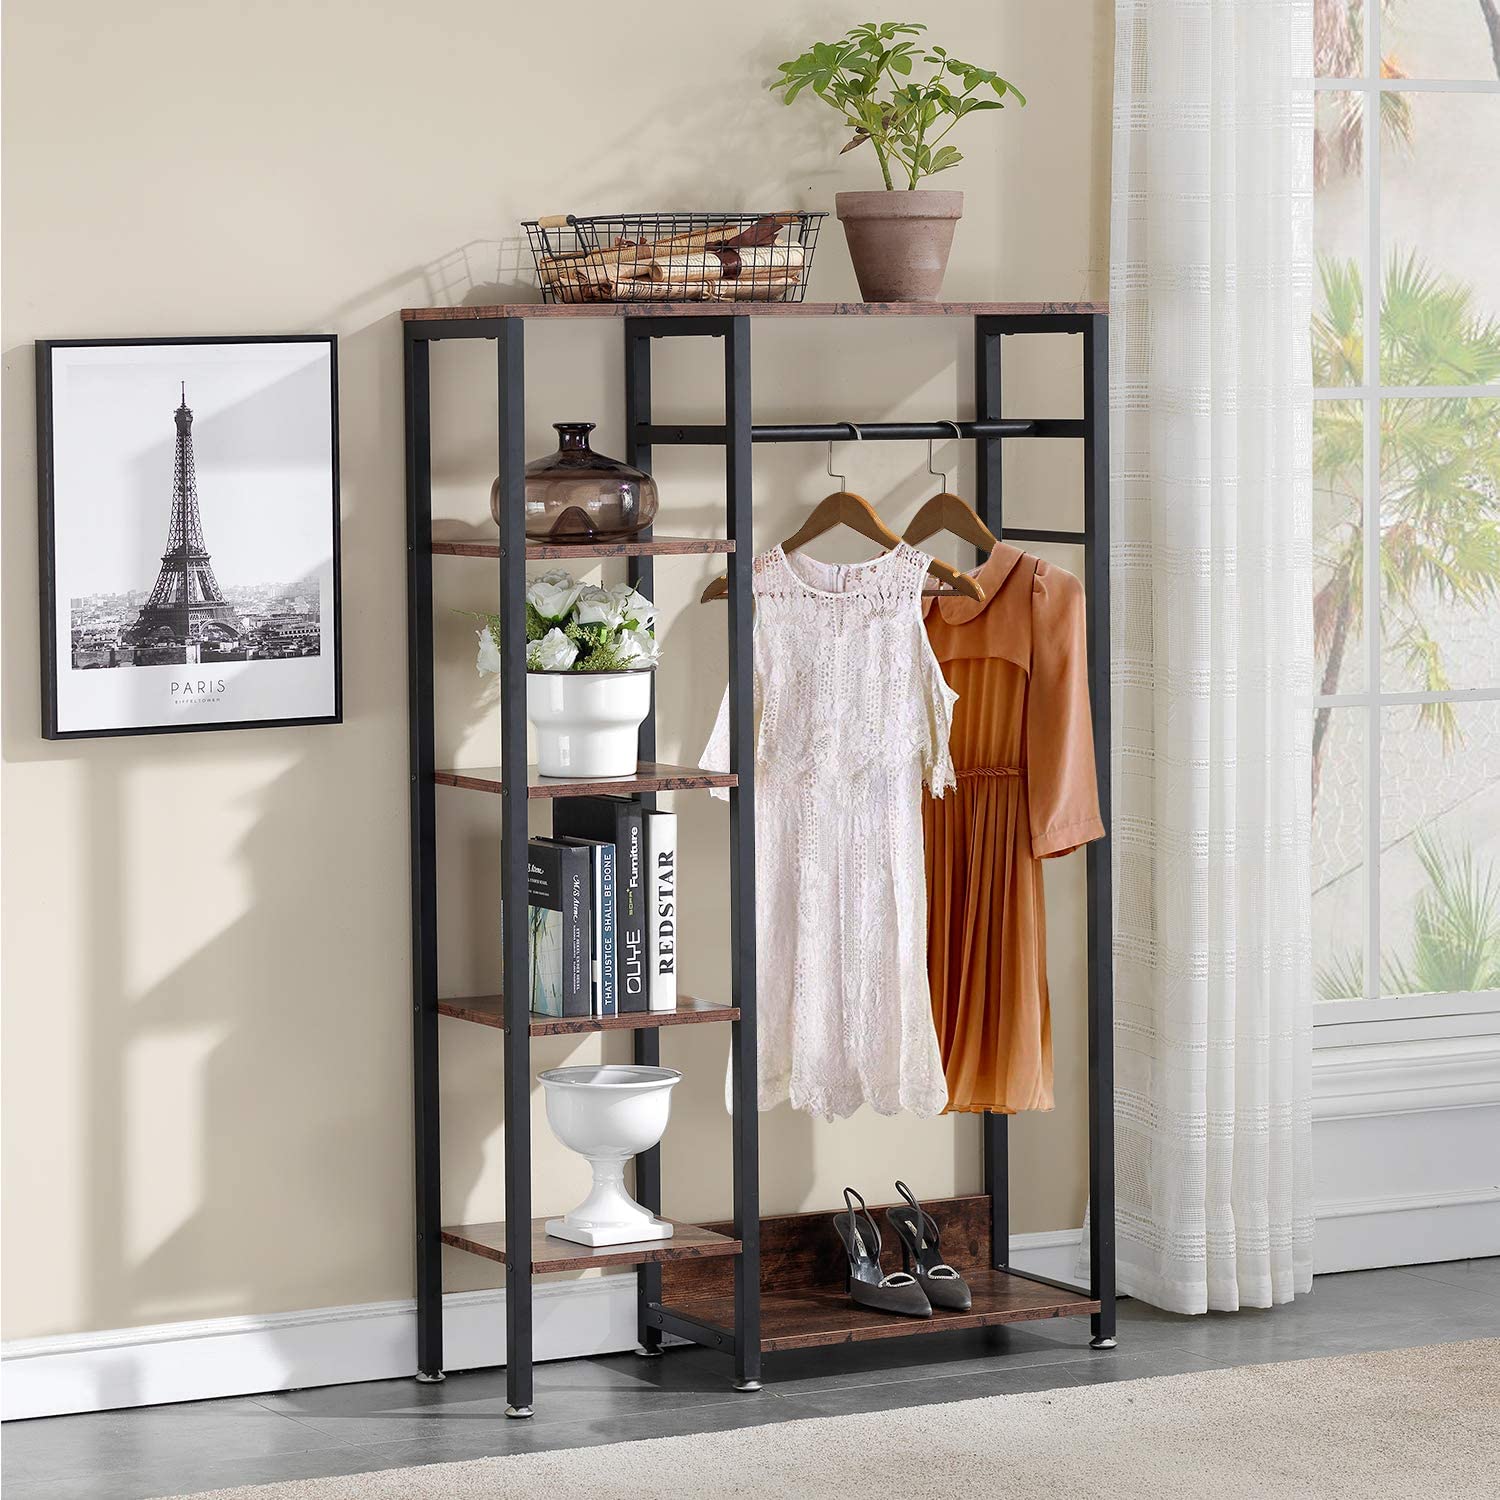 4 tiers closet/storage organizer with Shelves and Hanging Rod